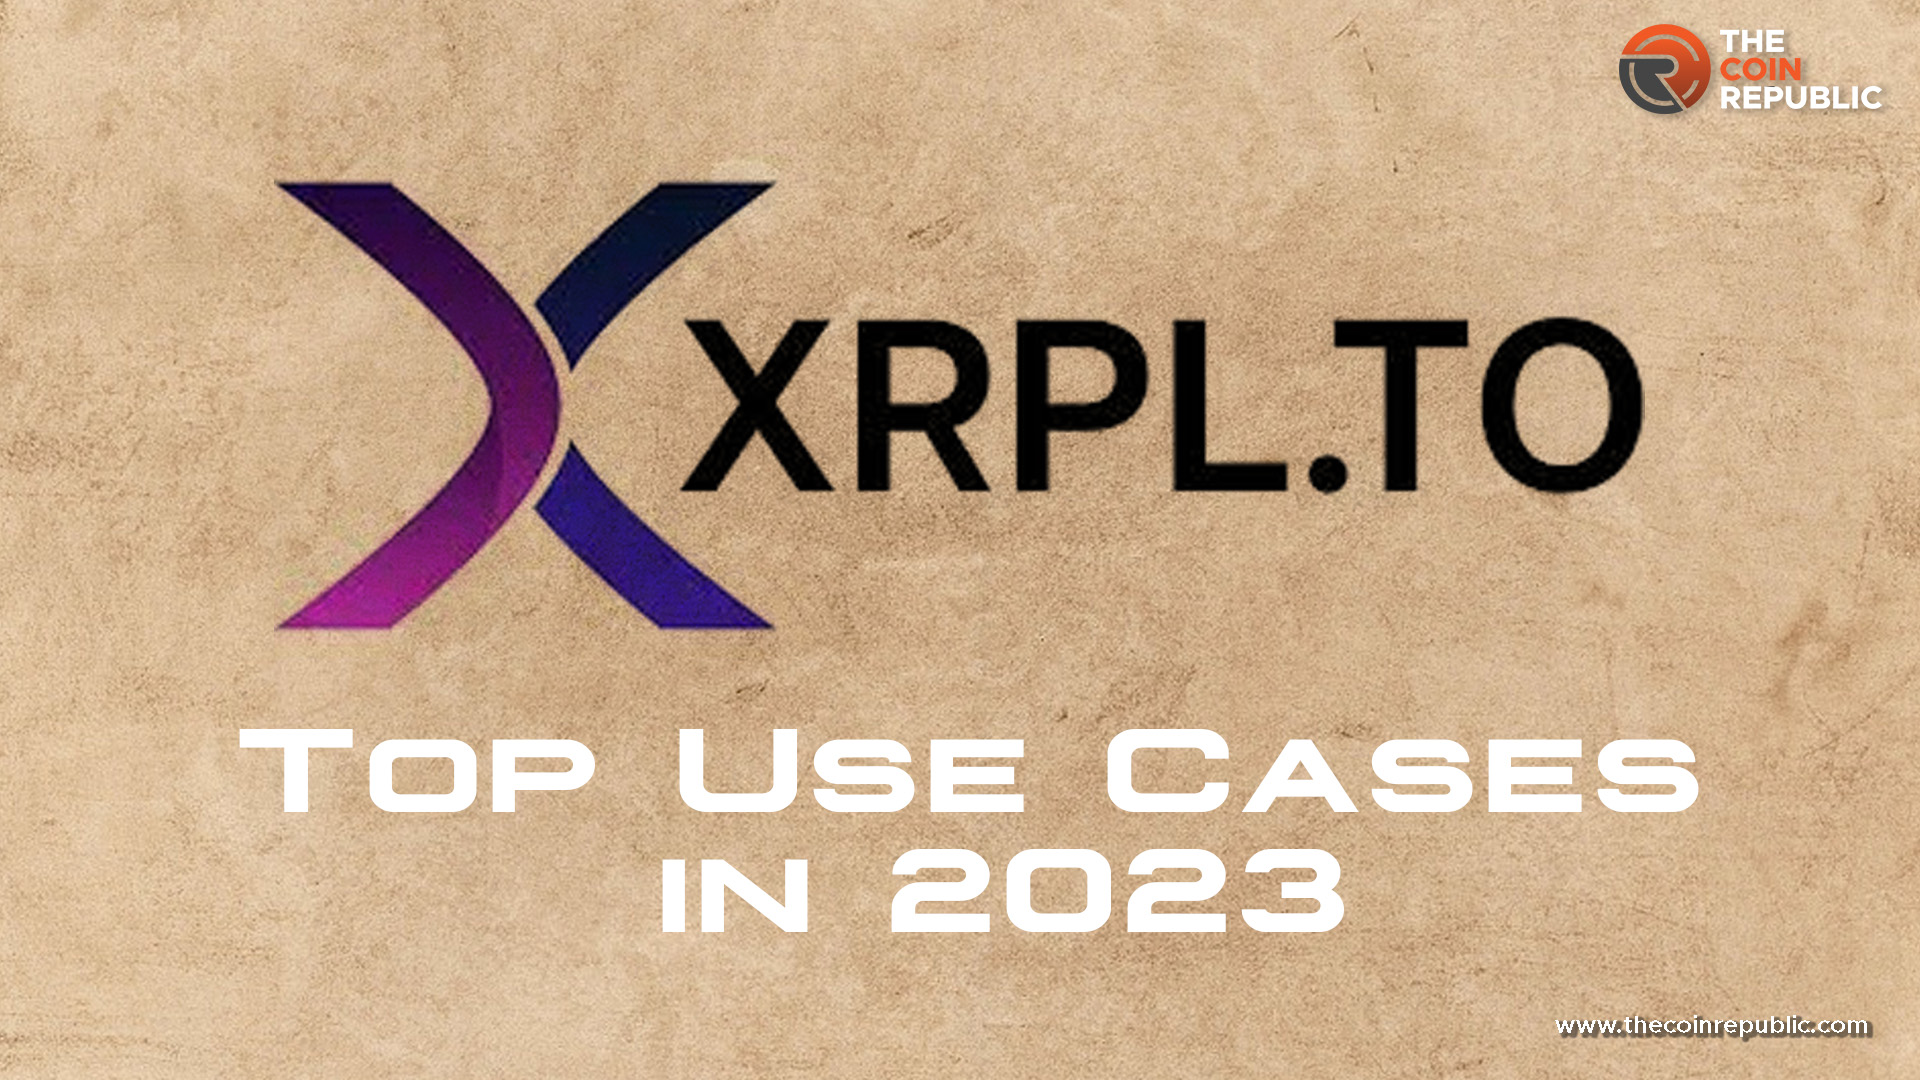 XRPL Top Use Cases: As Indicated by Community